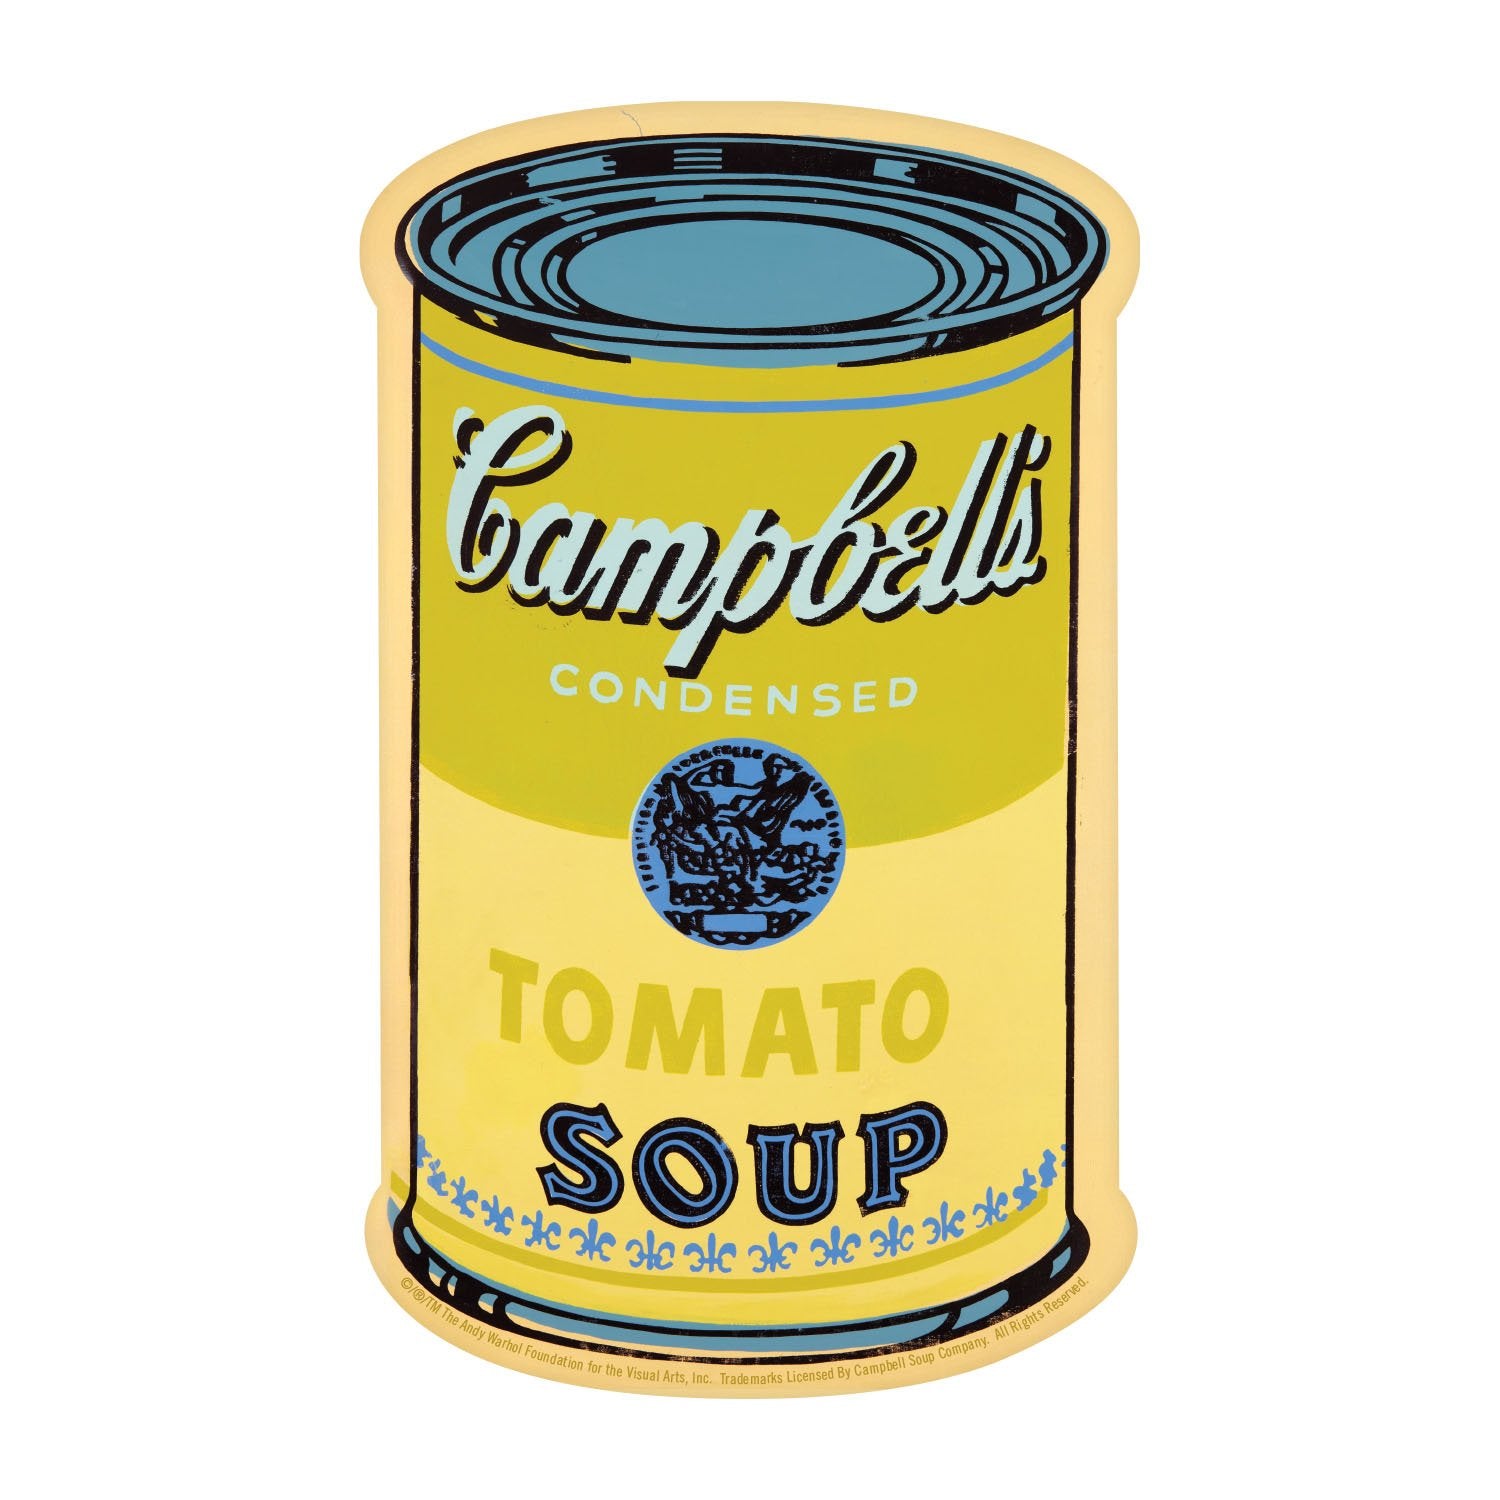 A playing card from the Andy Warhol memory game. This card is the iconic Campbells Condensed Tomato Soup image in yelllow.